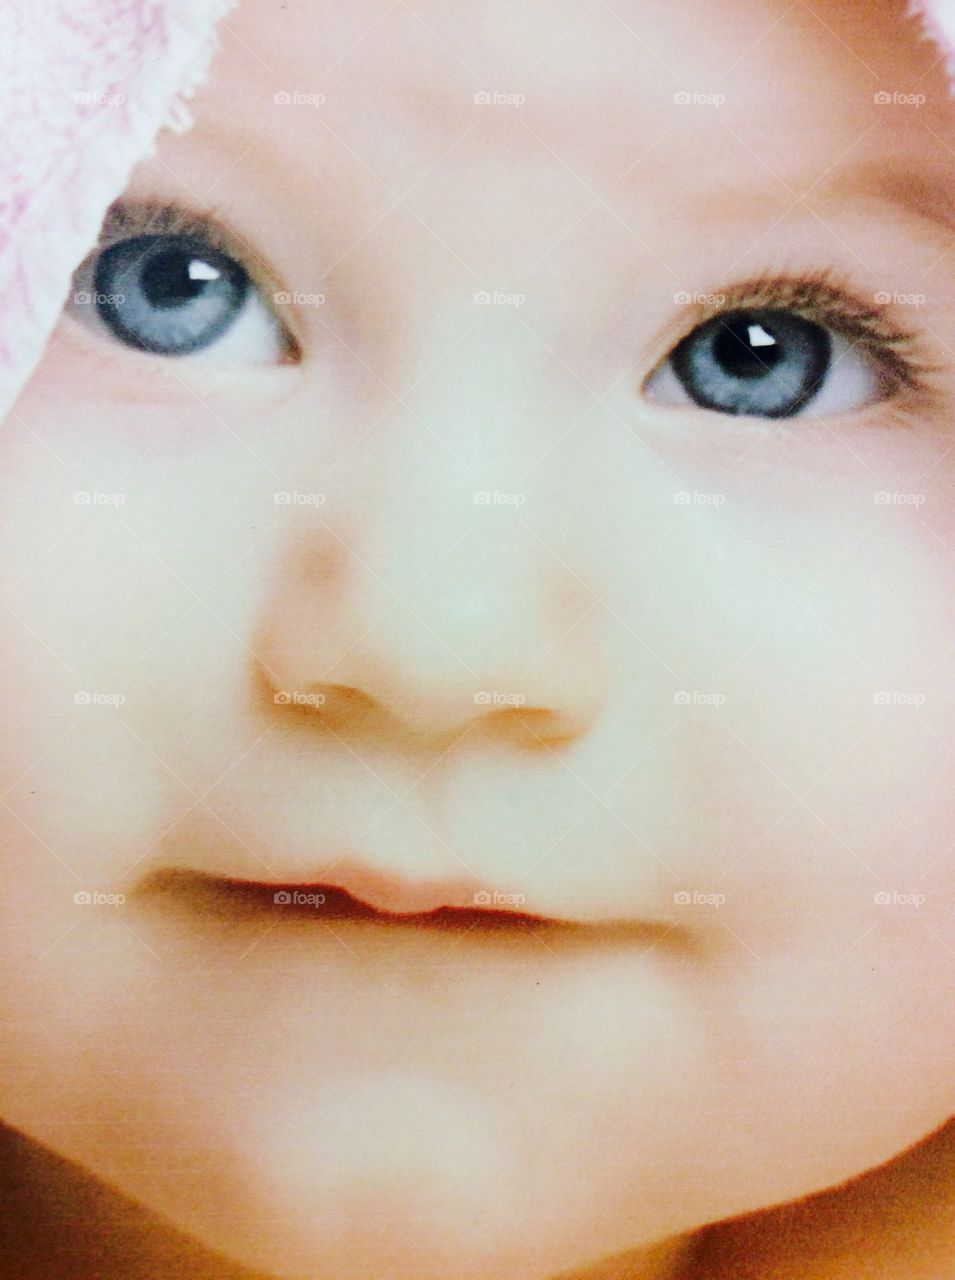 Extreme close-up of baby face